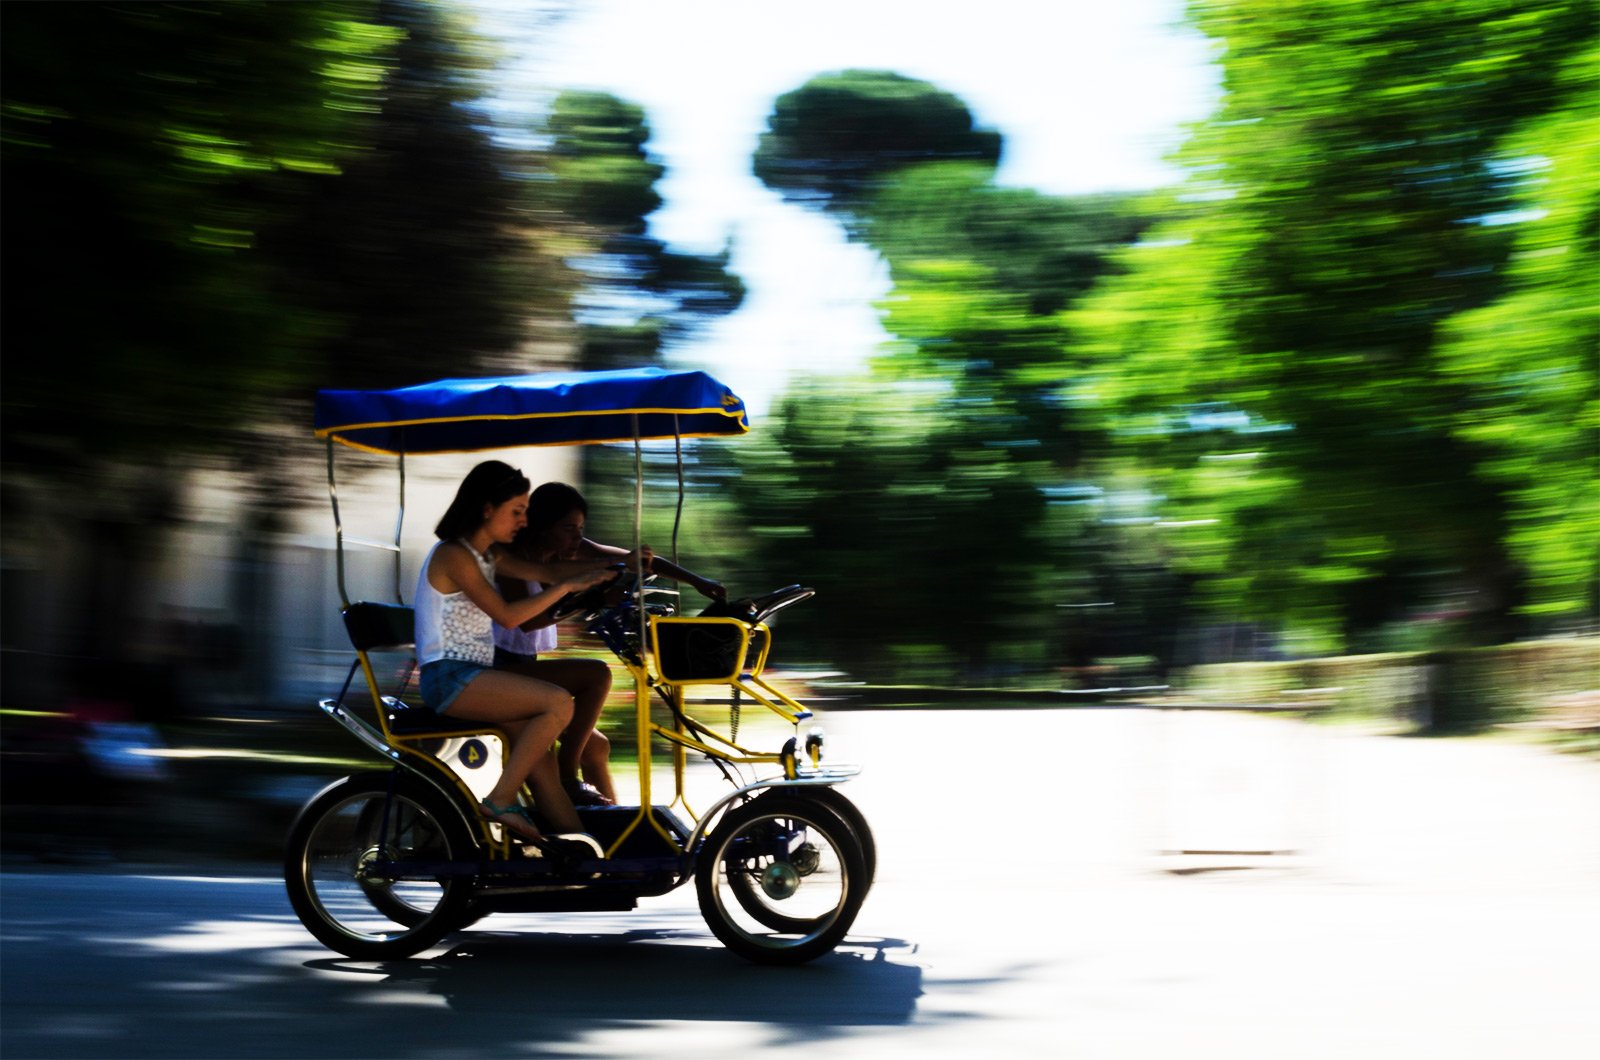 How to explore Villa Borghese in the quadricycle in Rome